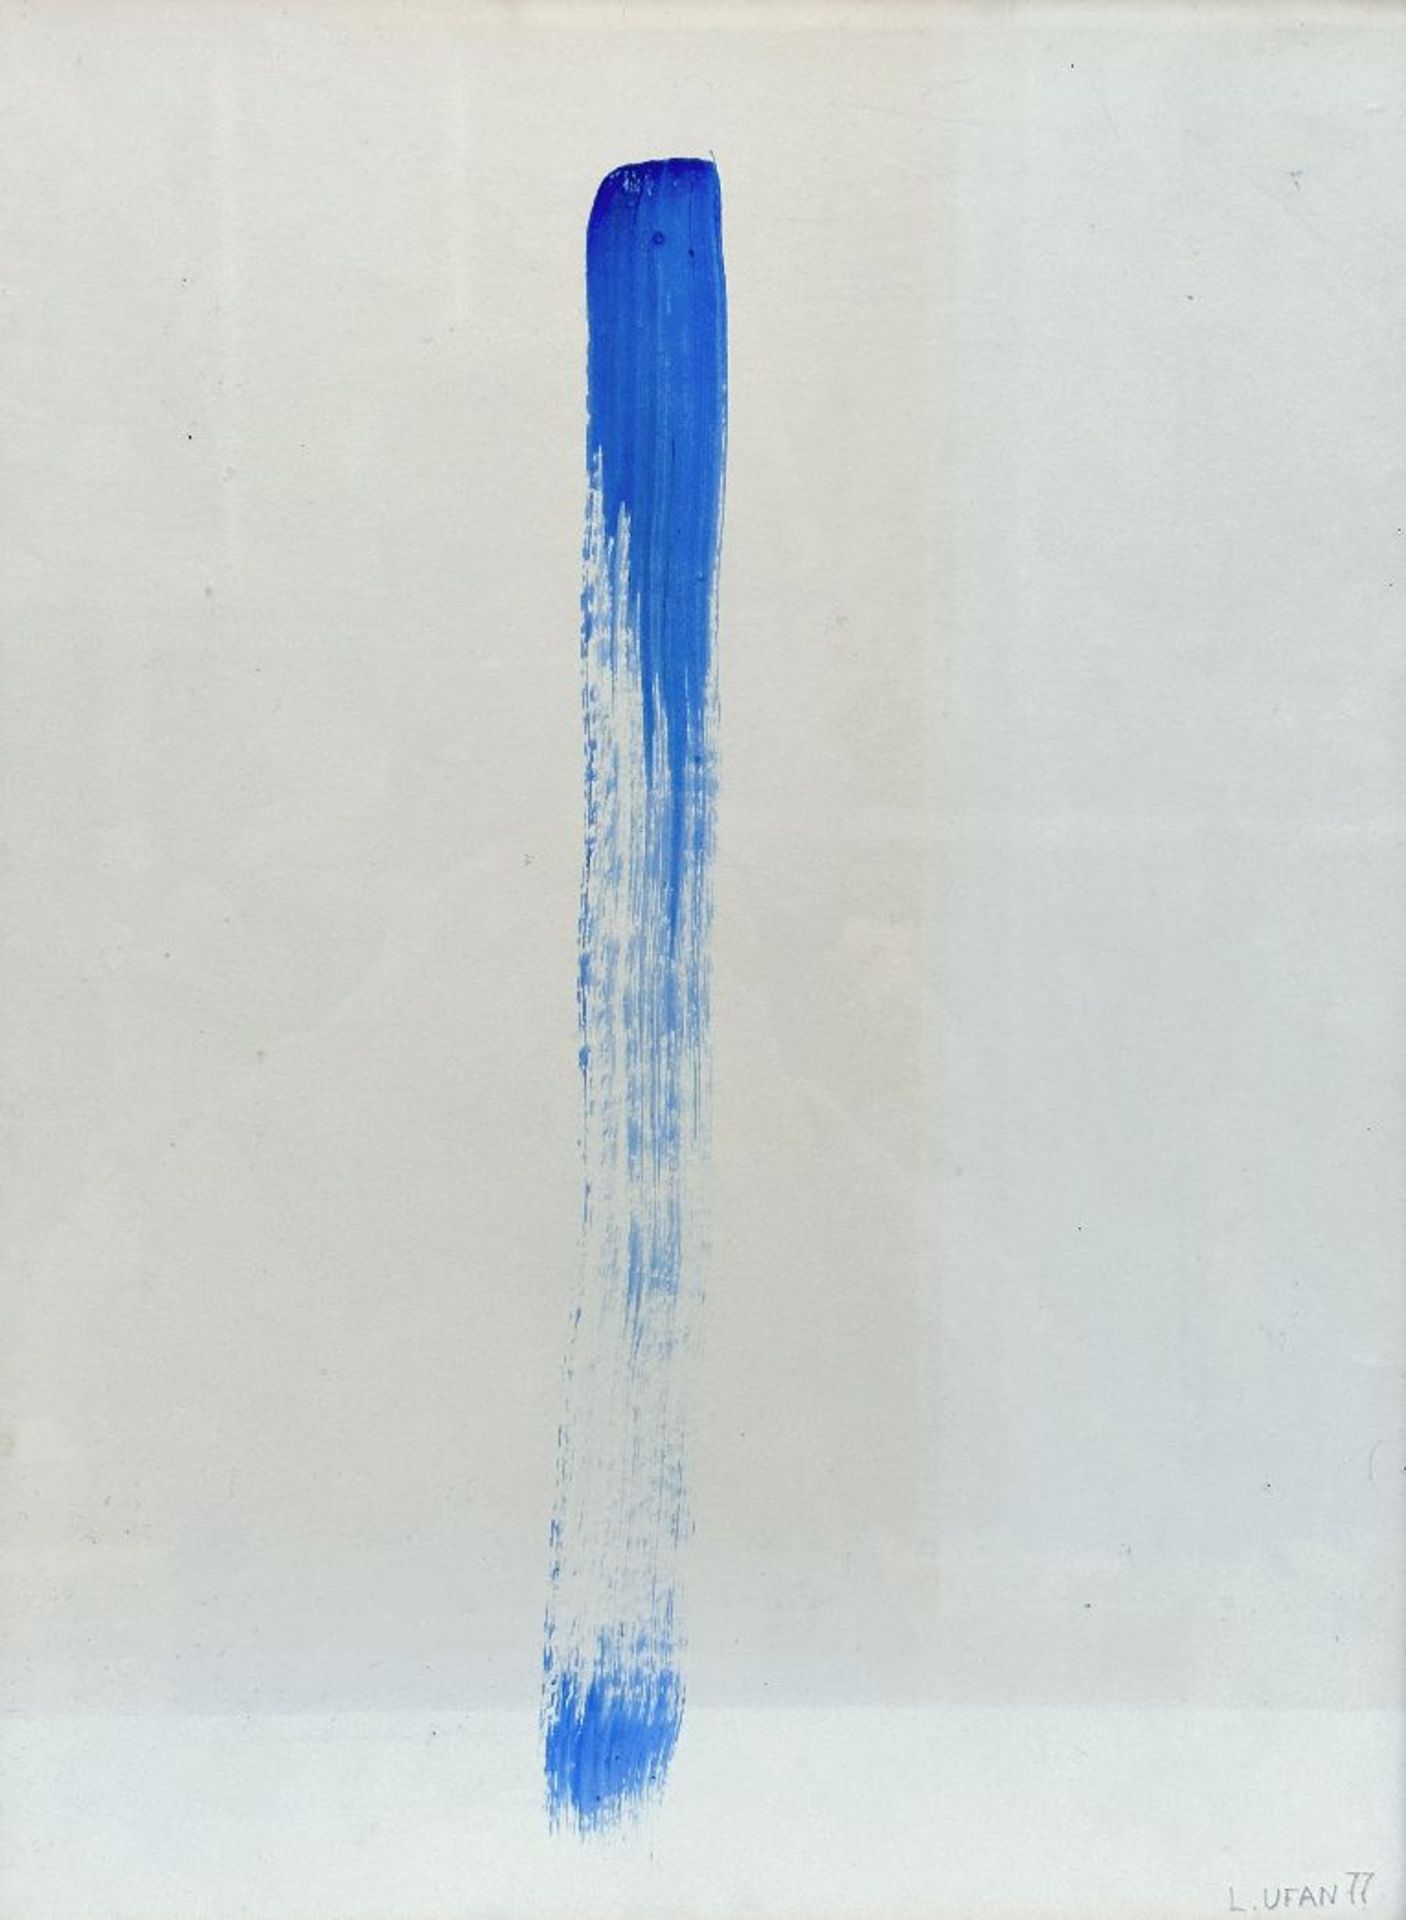 Lee Ufan (possibly by his hand): work on paper 'blue brush stroke'